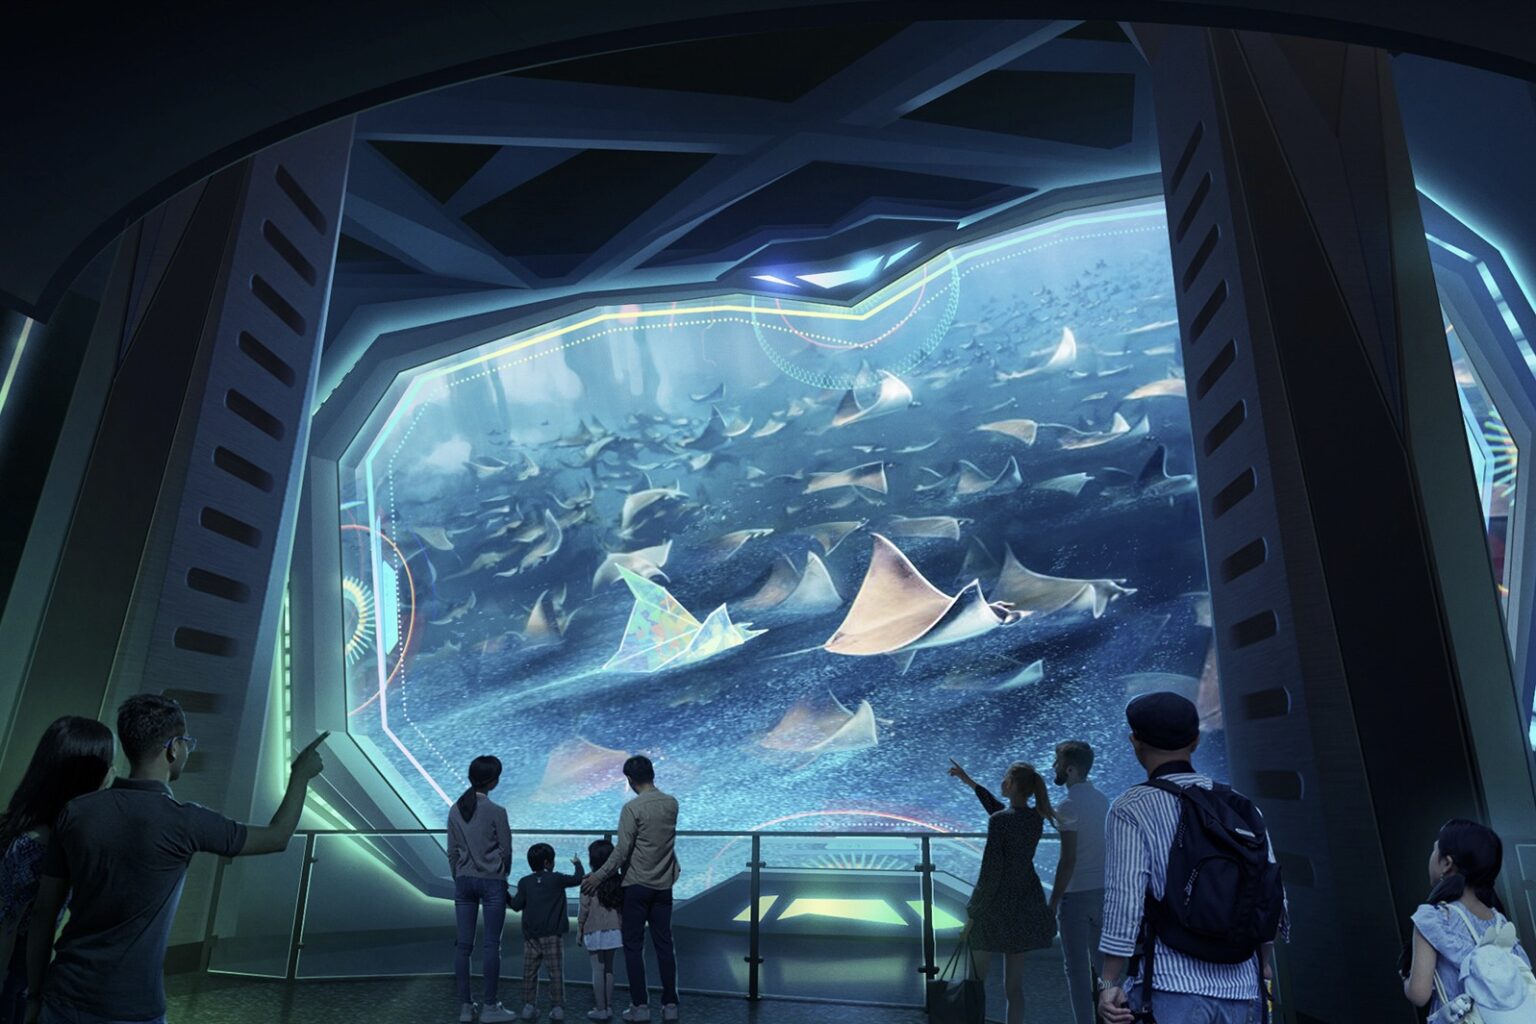 an artist's impression of vquarium, which shows visitors in front of a virtual aquarium